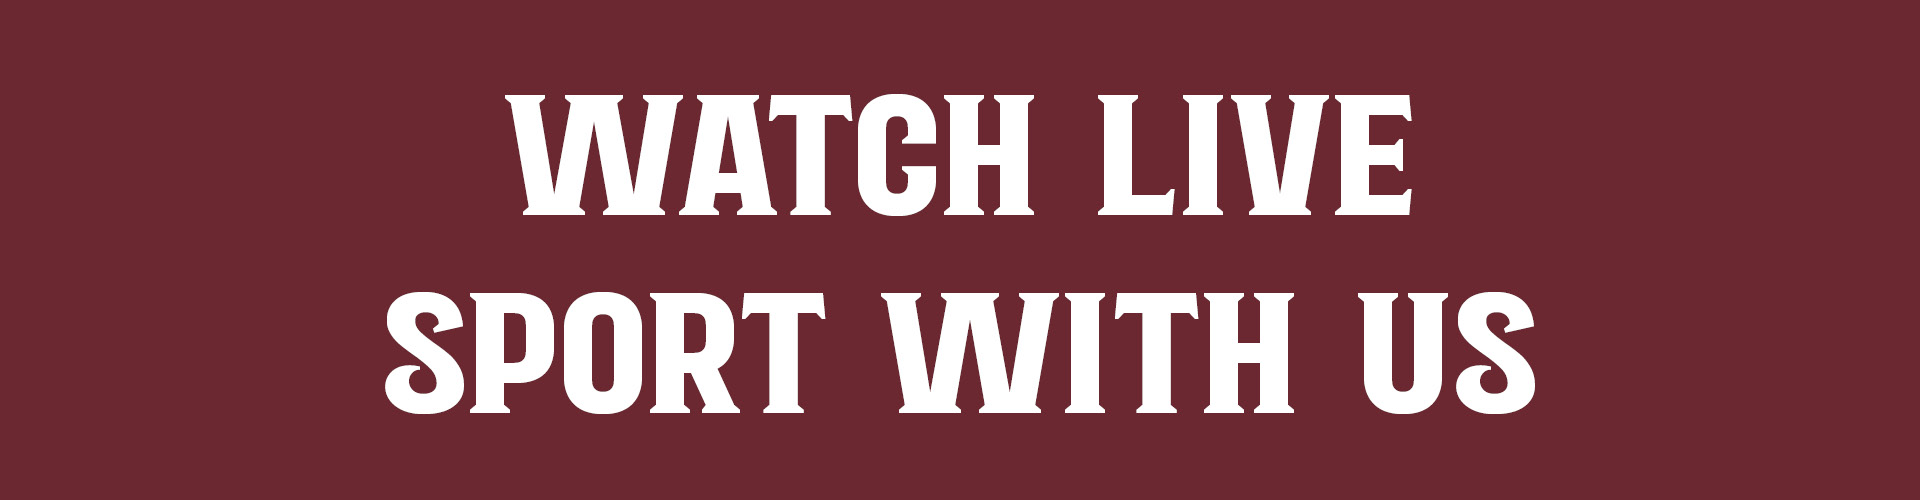 Watch live sport in Doncaster at The Hatfield Chace pub